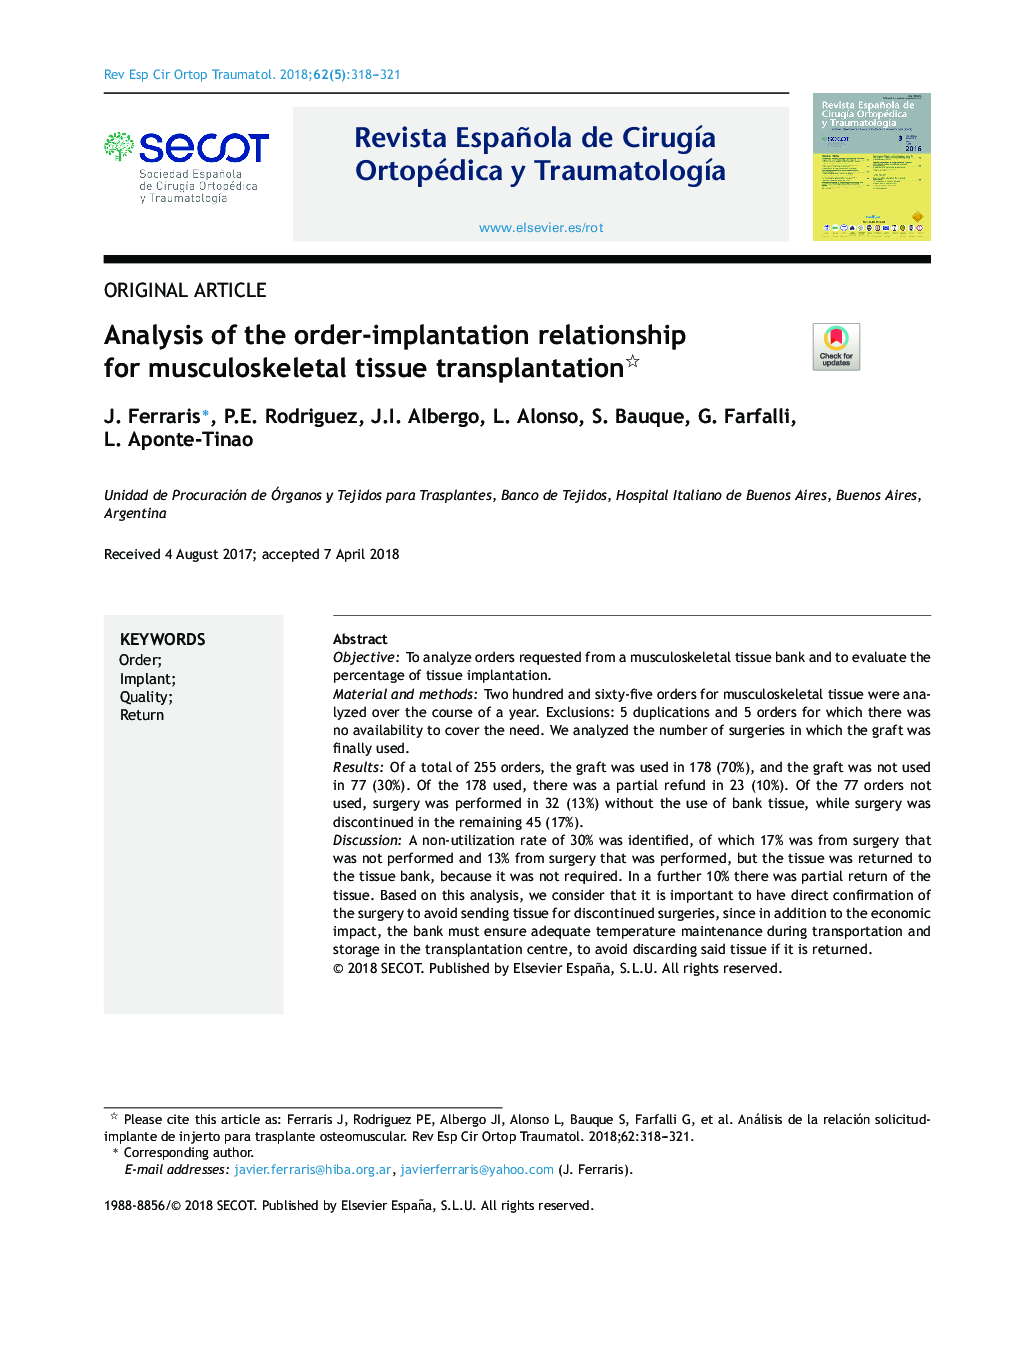 Analysis of the order-implantation relationship for musculoskeletal tissue transplantation